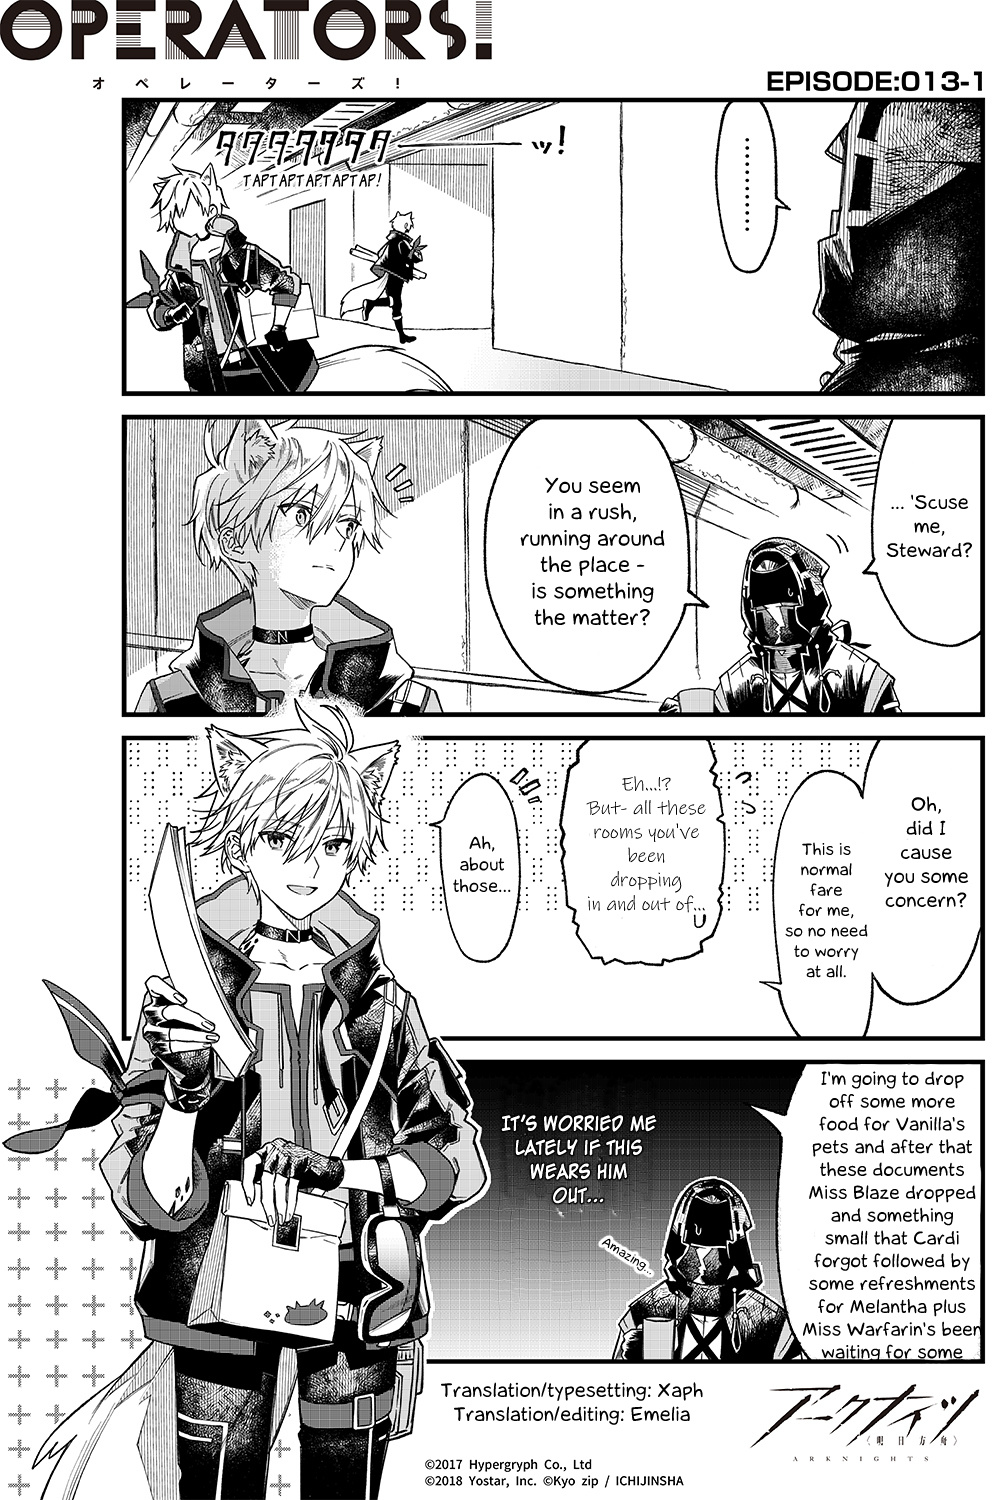 Arknights: Operators! Chapter 13.1 #1